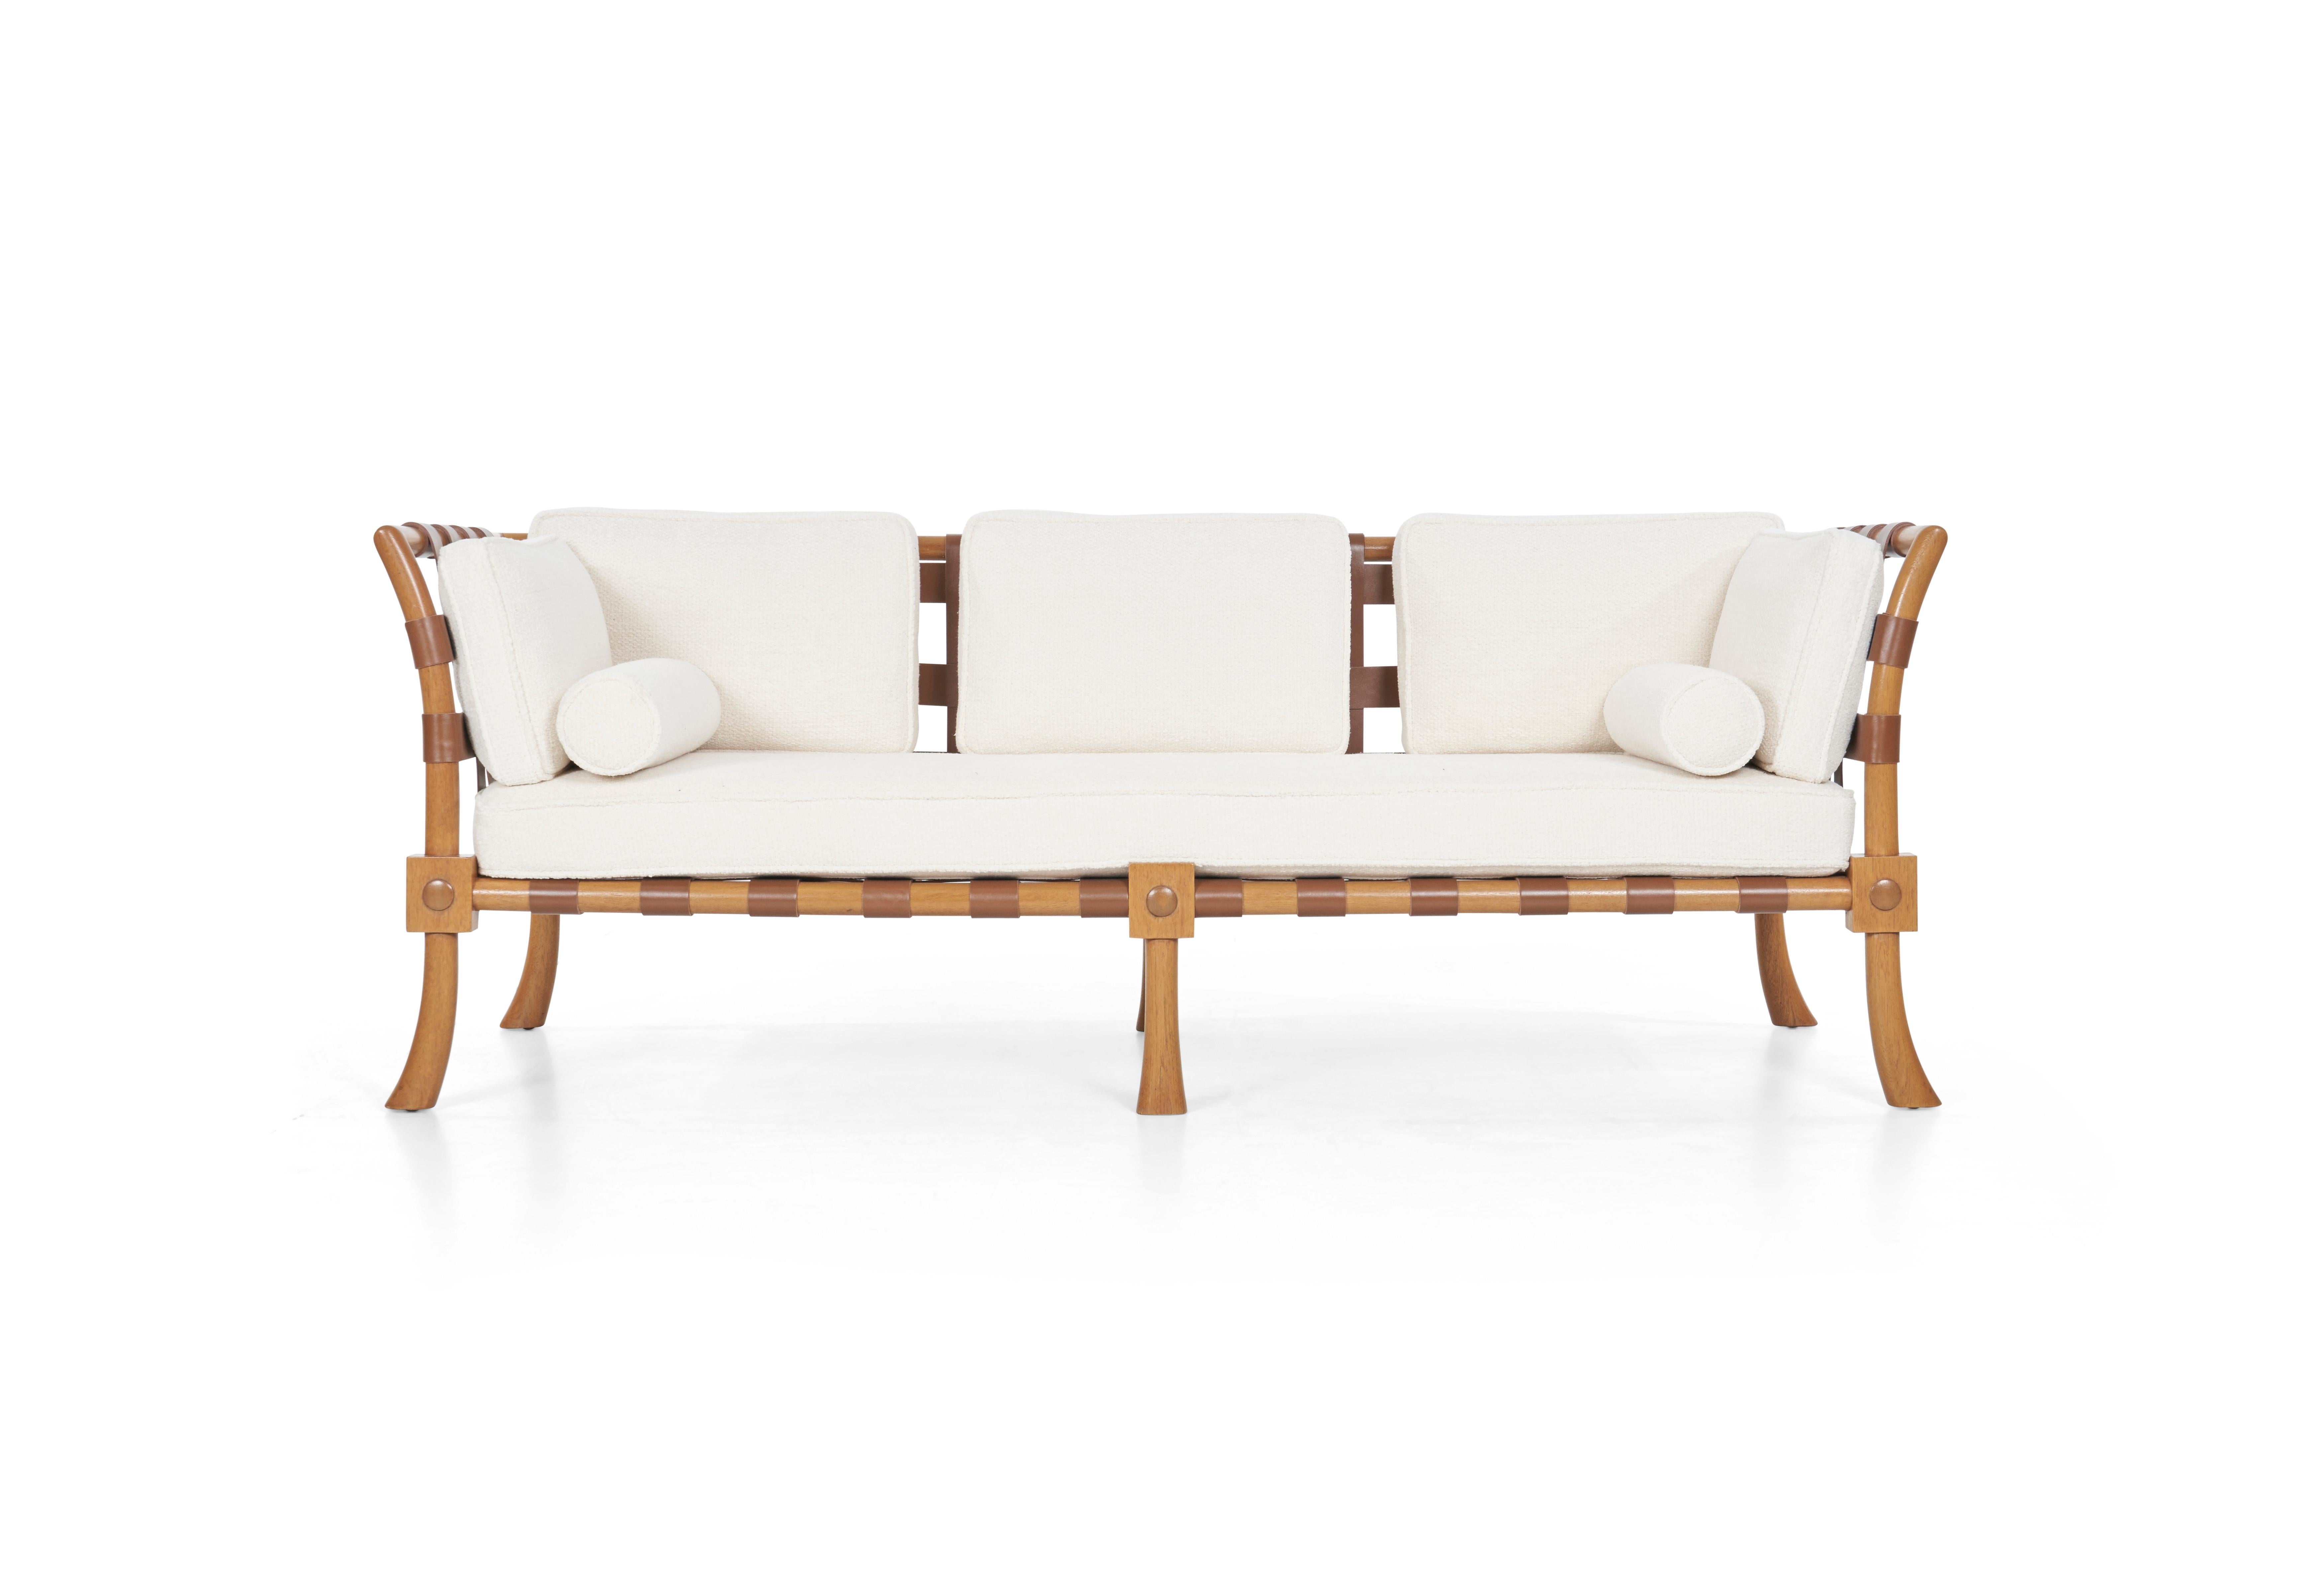 Robsjohn-Gibbings custom sofa, solid bleached mahogany, exposed leather belting straps support cushions.
Professionally restored mahogany wood, replaced leather straps, reupholstered with great plains nubby wool fabric.